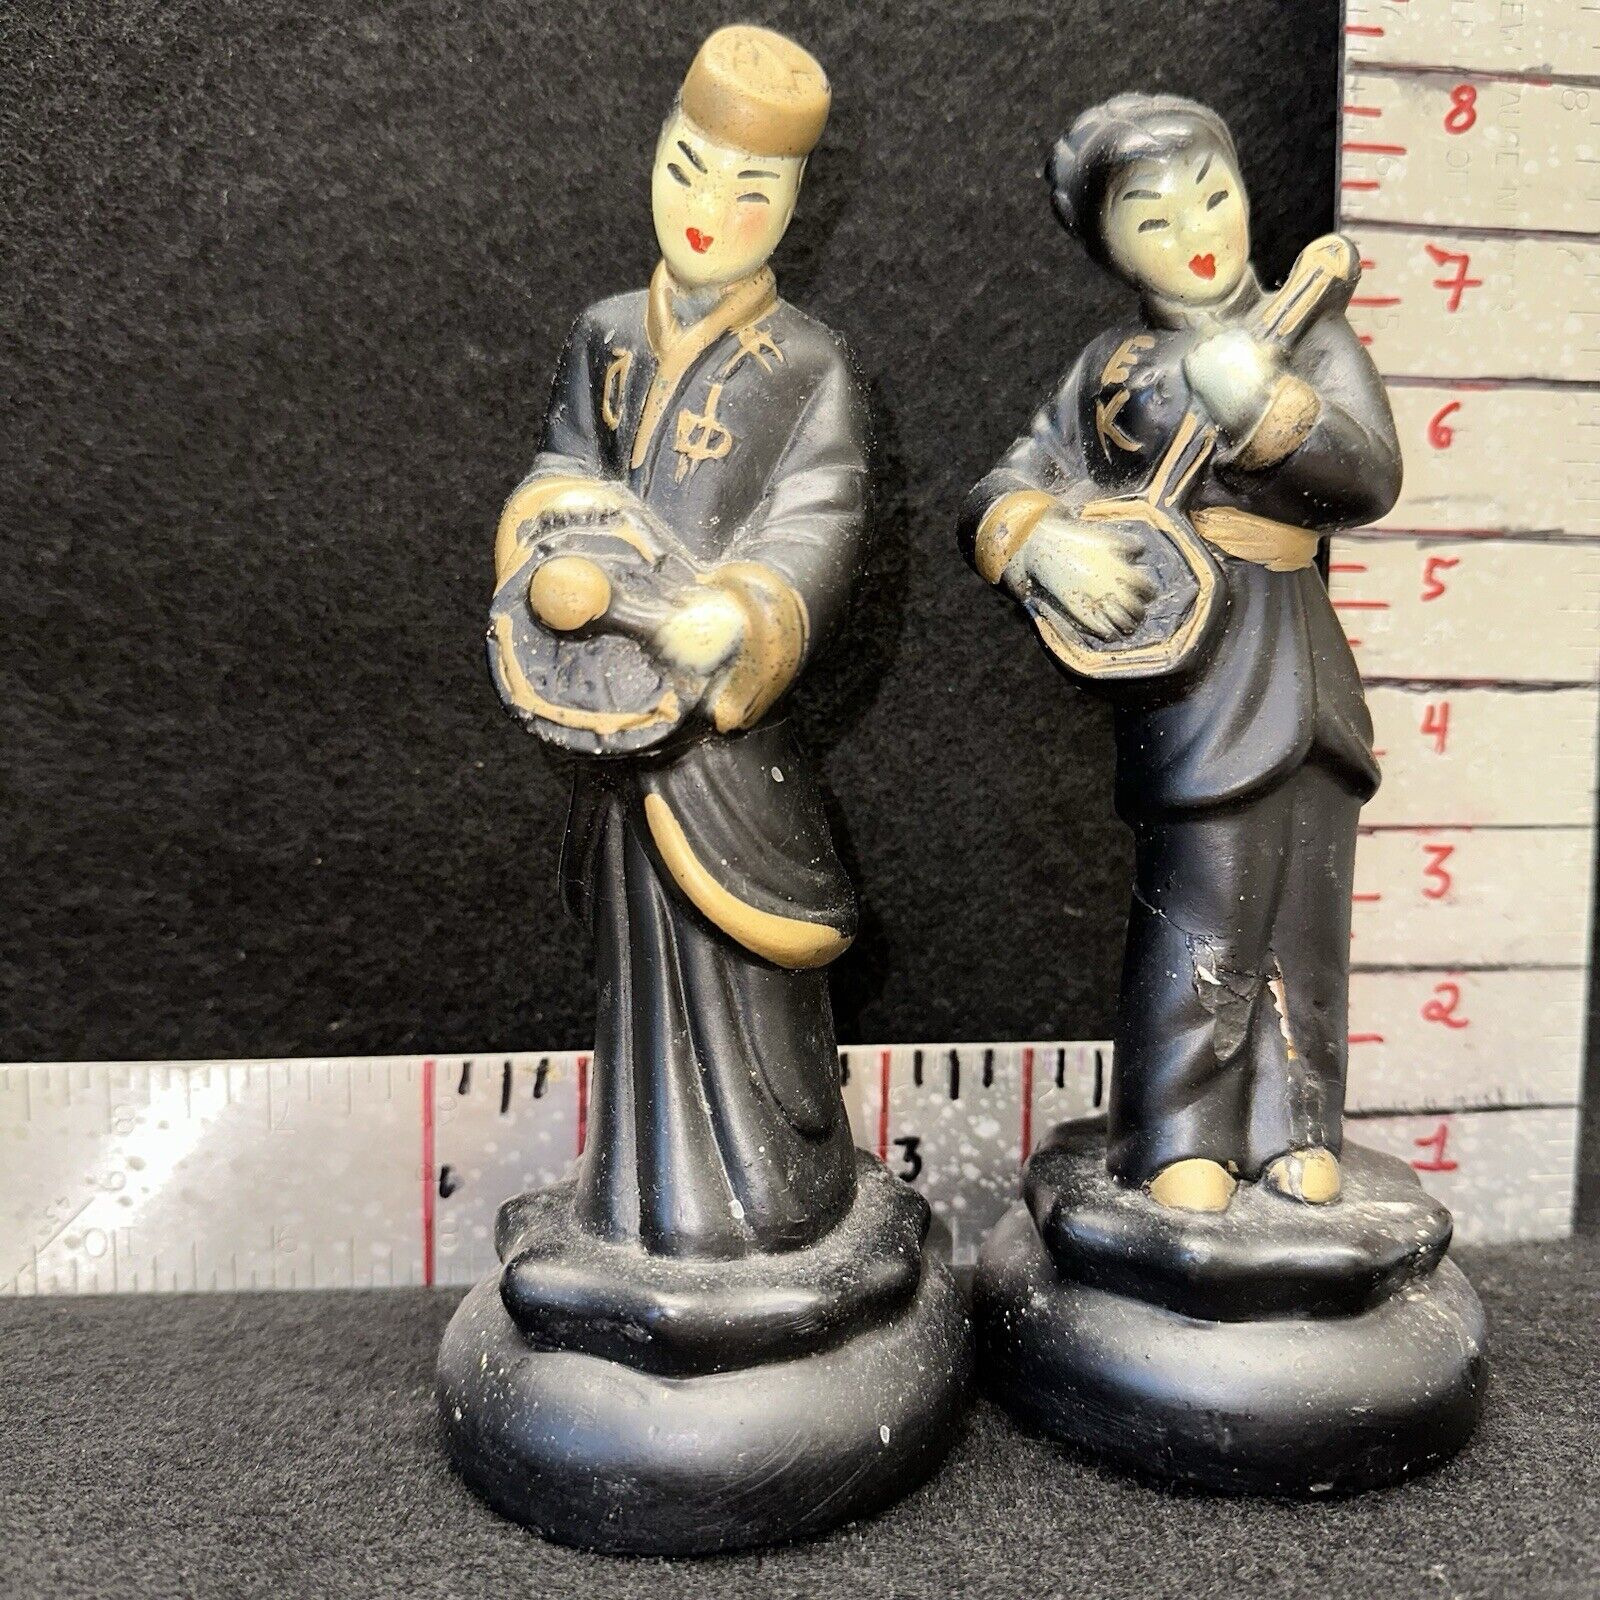 Vintage Japanese 7.5” Figurines - 2 Figures Playing Music - Excellent Condition